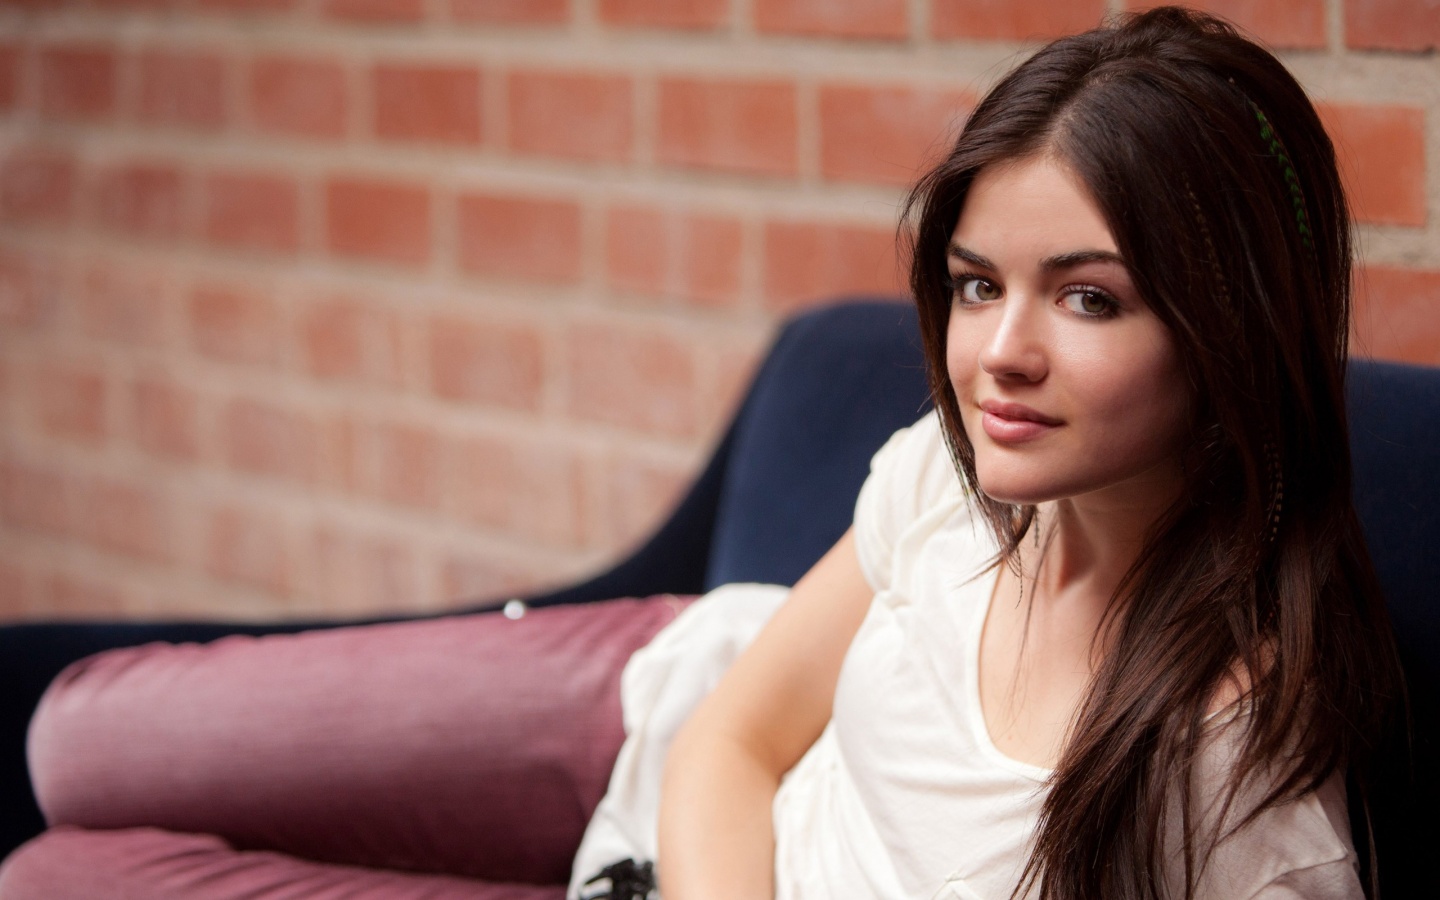 Description: The Wallpaper above is Hot lucy hale Wallpaper in Resolution 1440x900. Choose your Resolution and Download Hot lucy hale Wallpaper